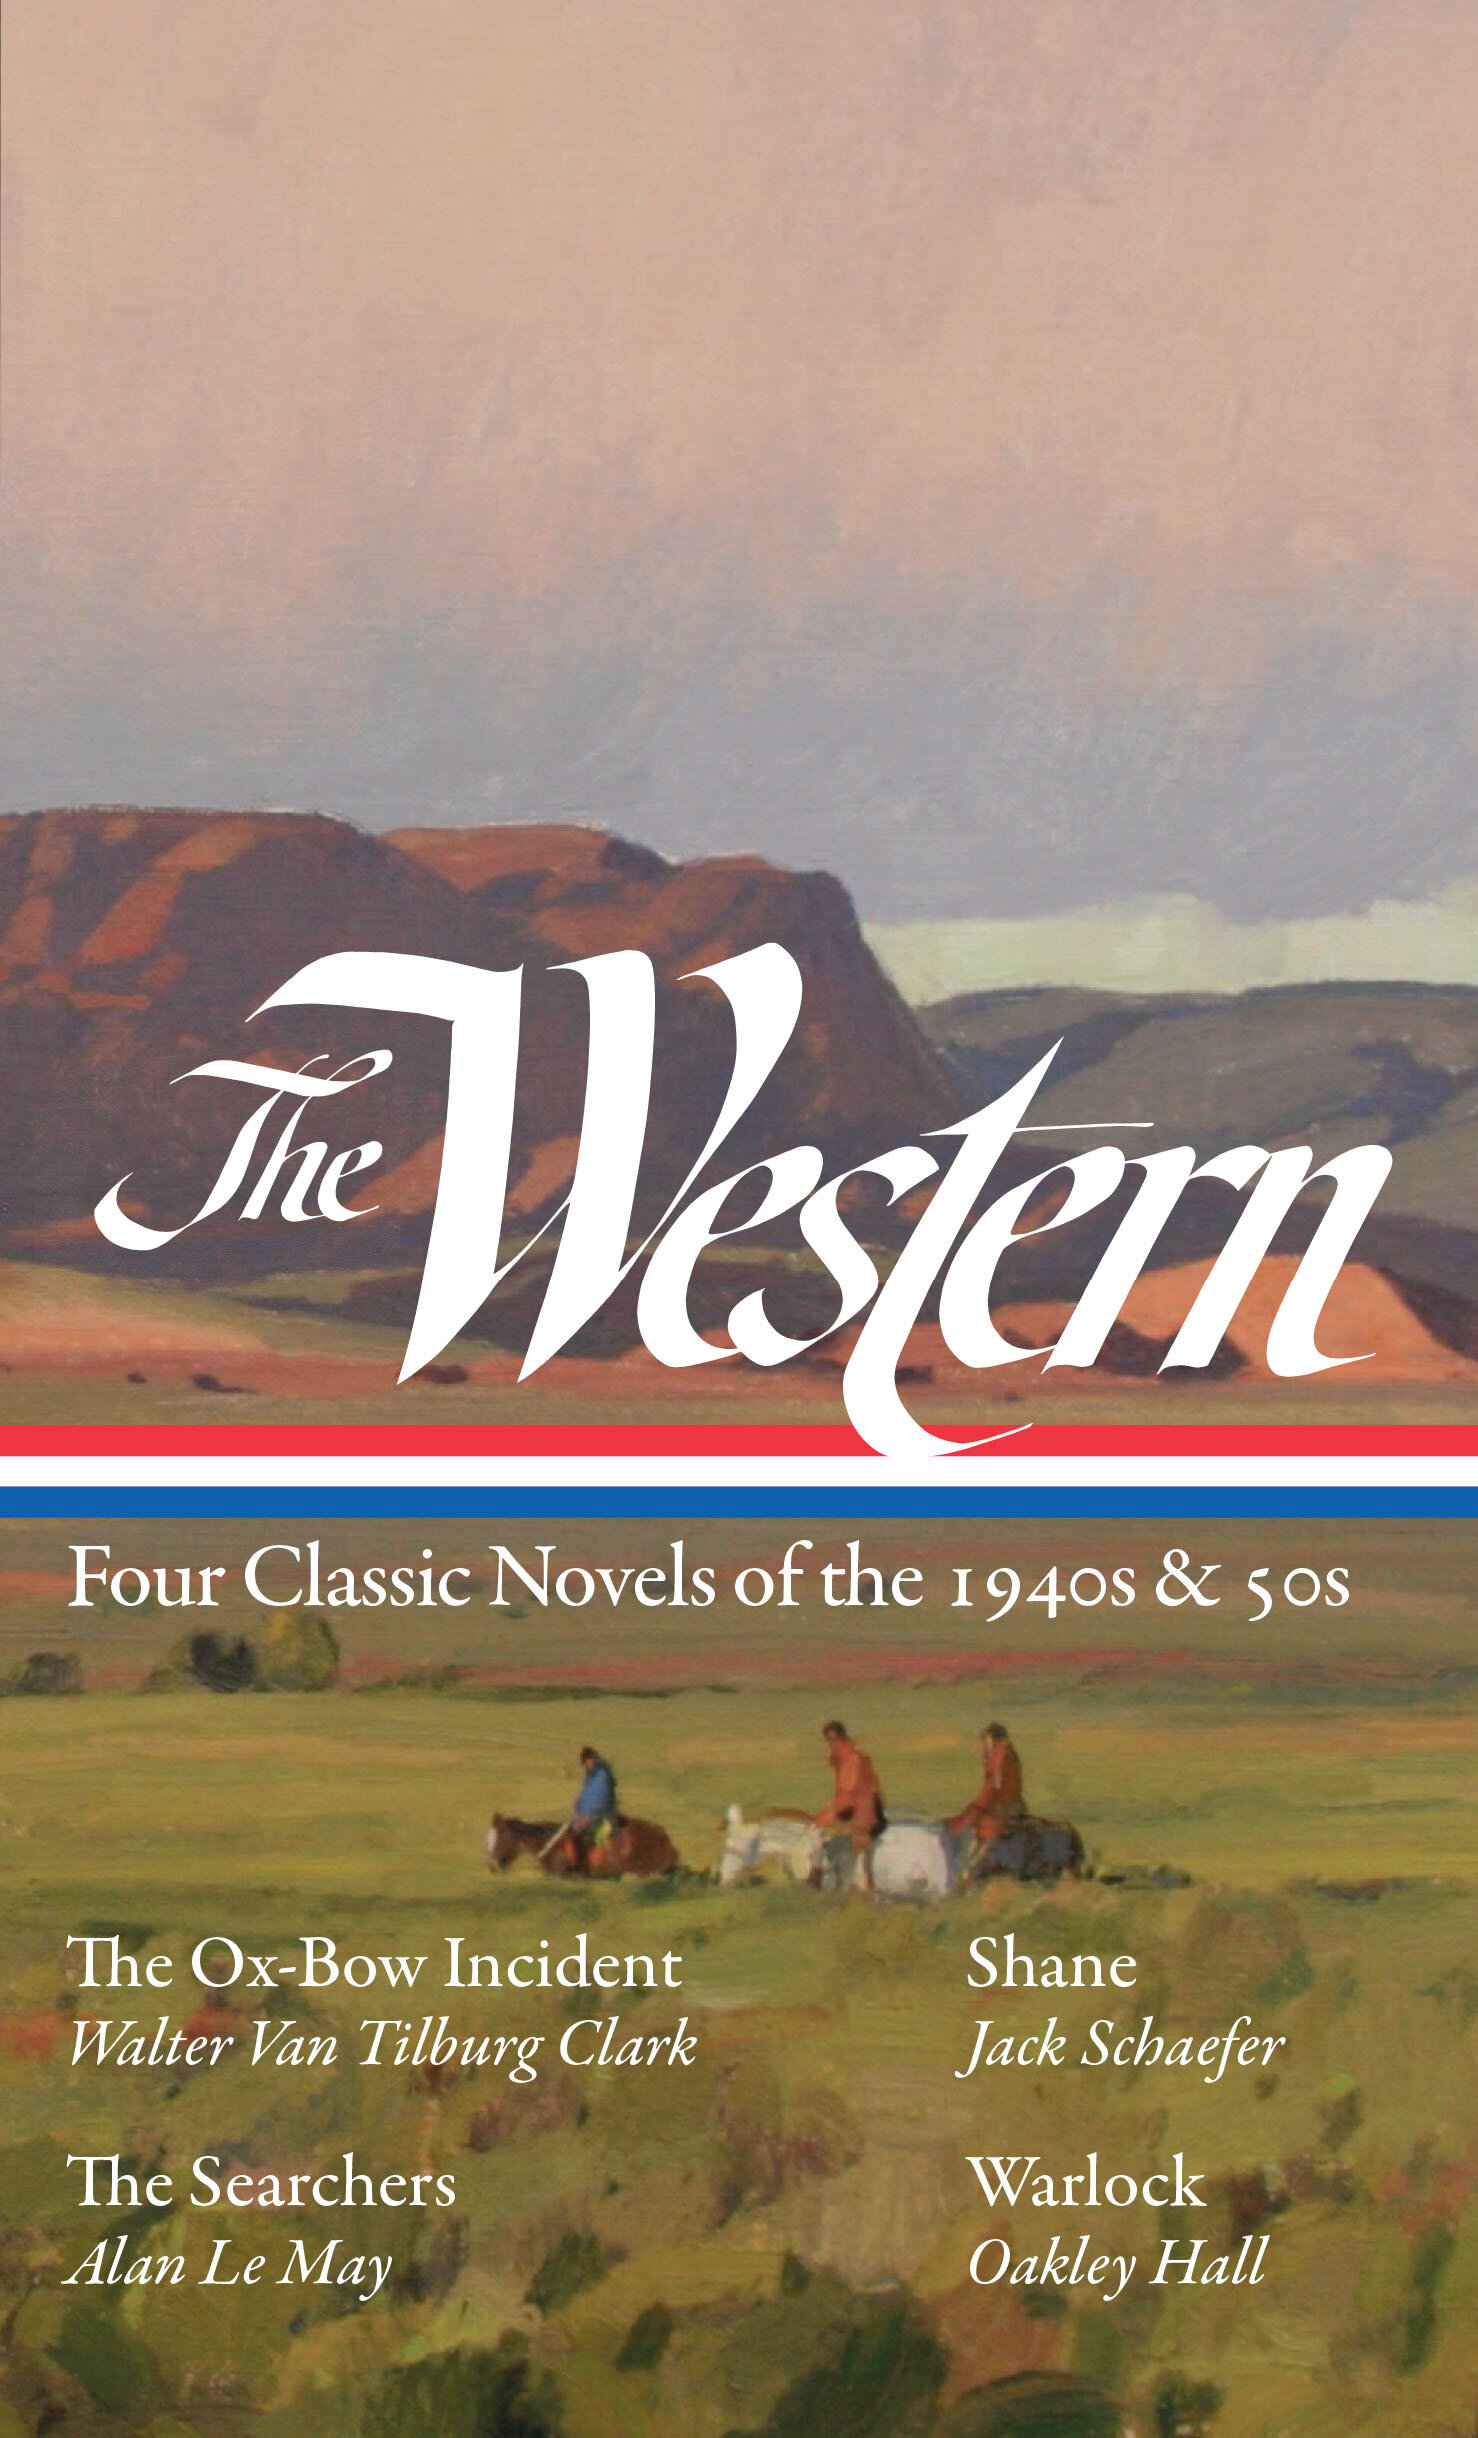 “The Western,” courtesy of the Library of America